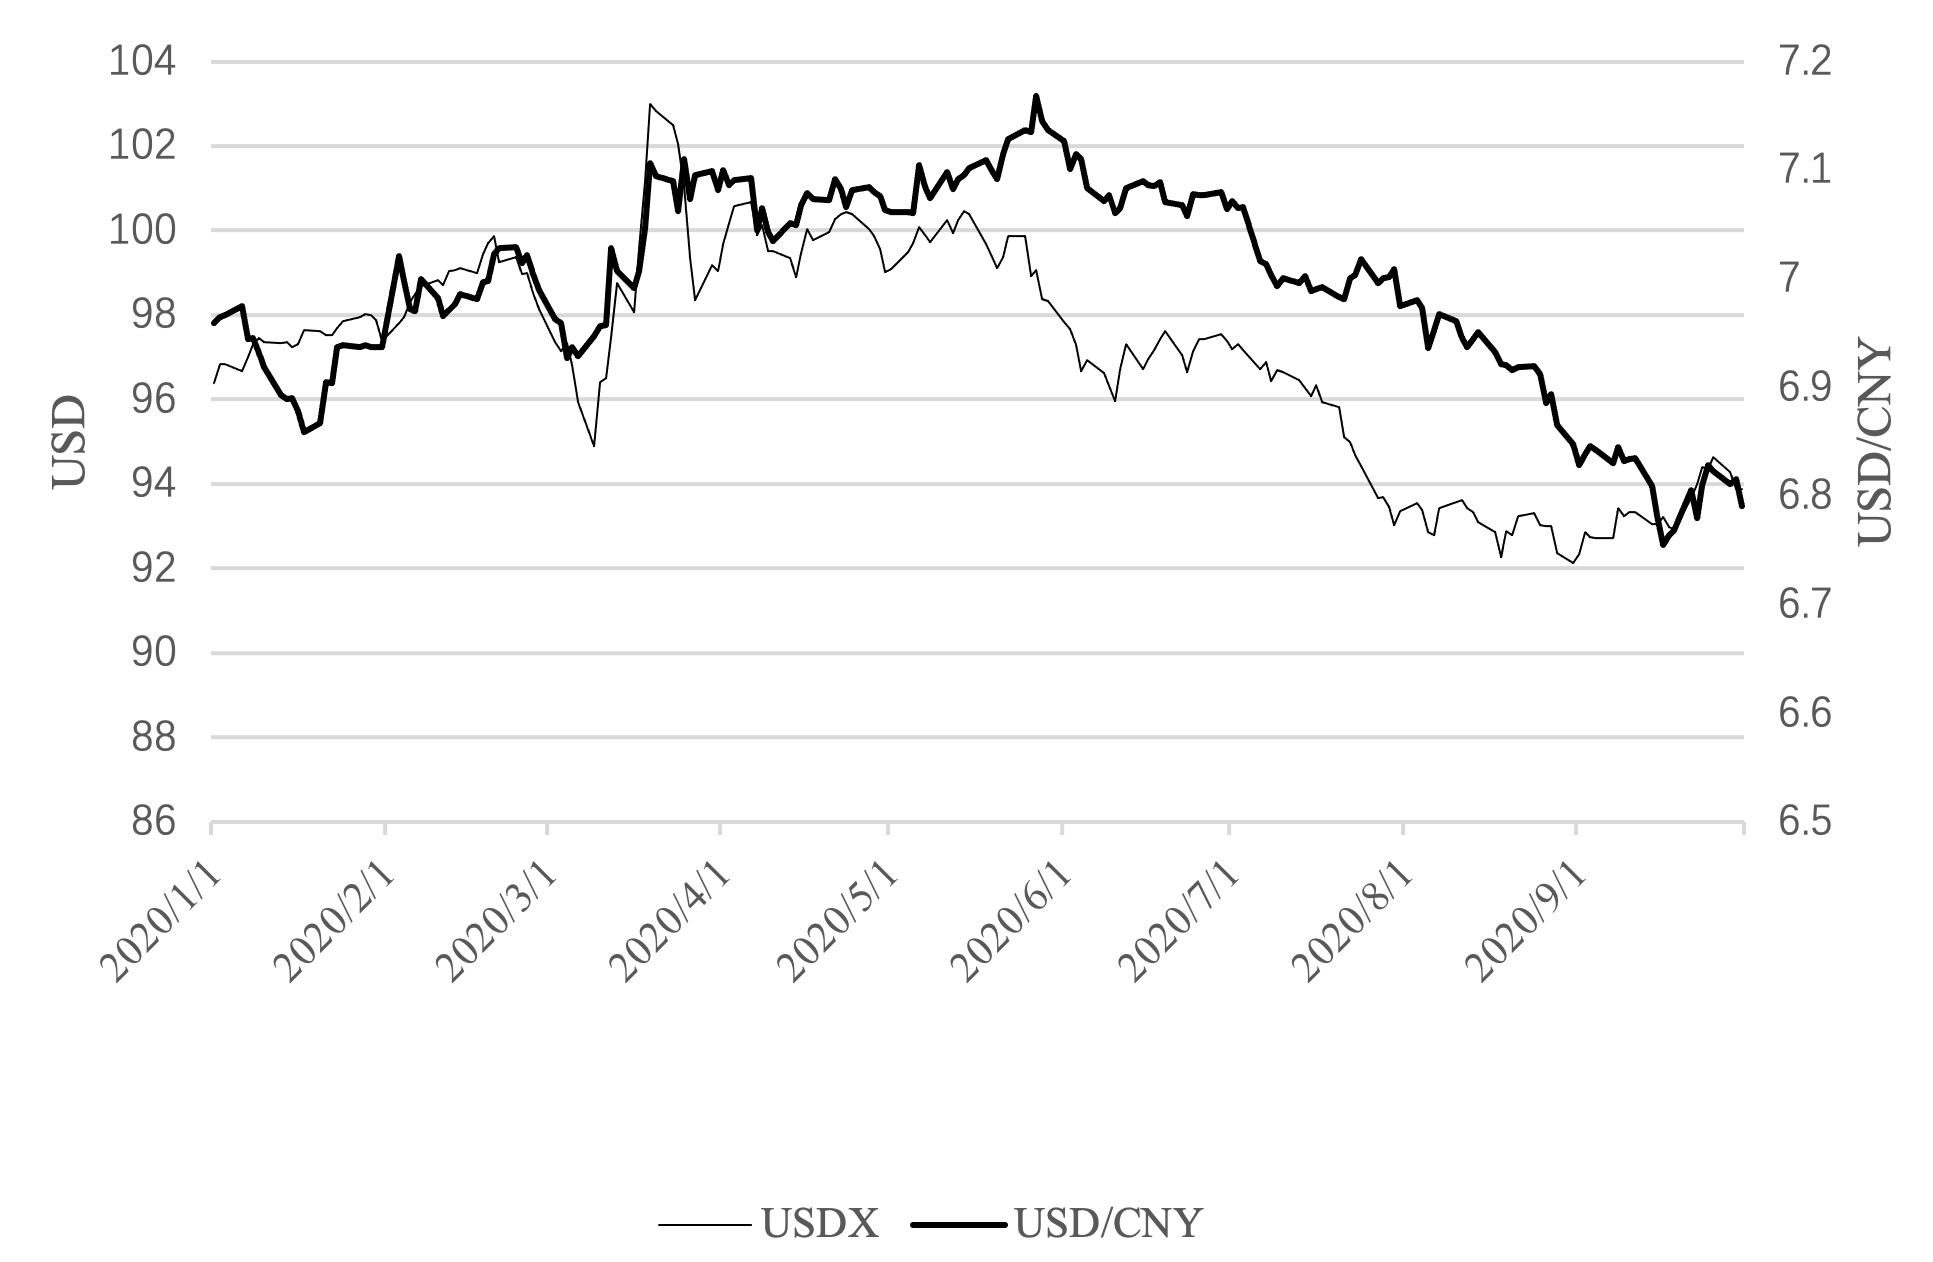 Usd to rmb